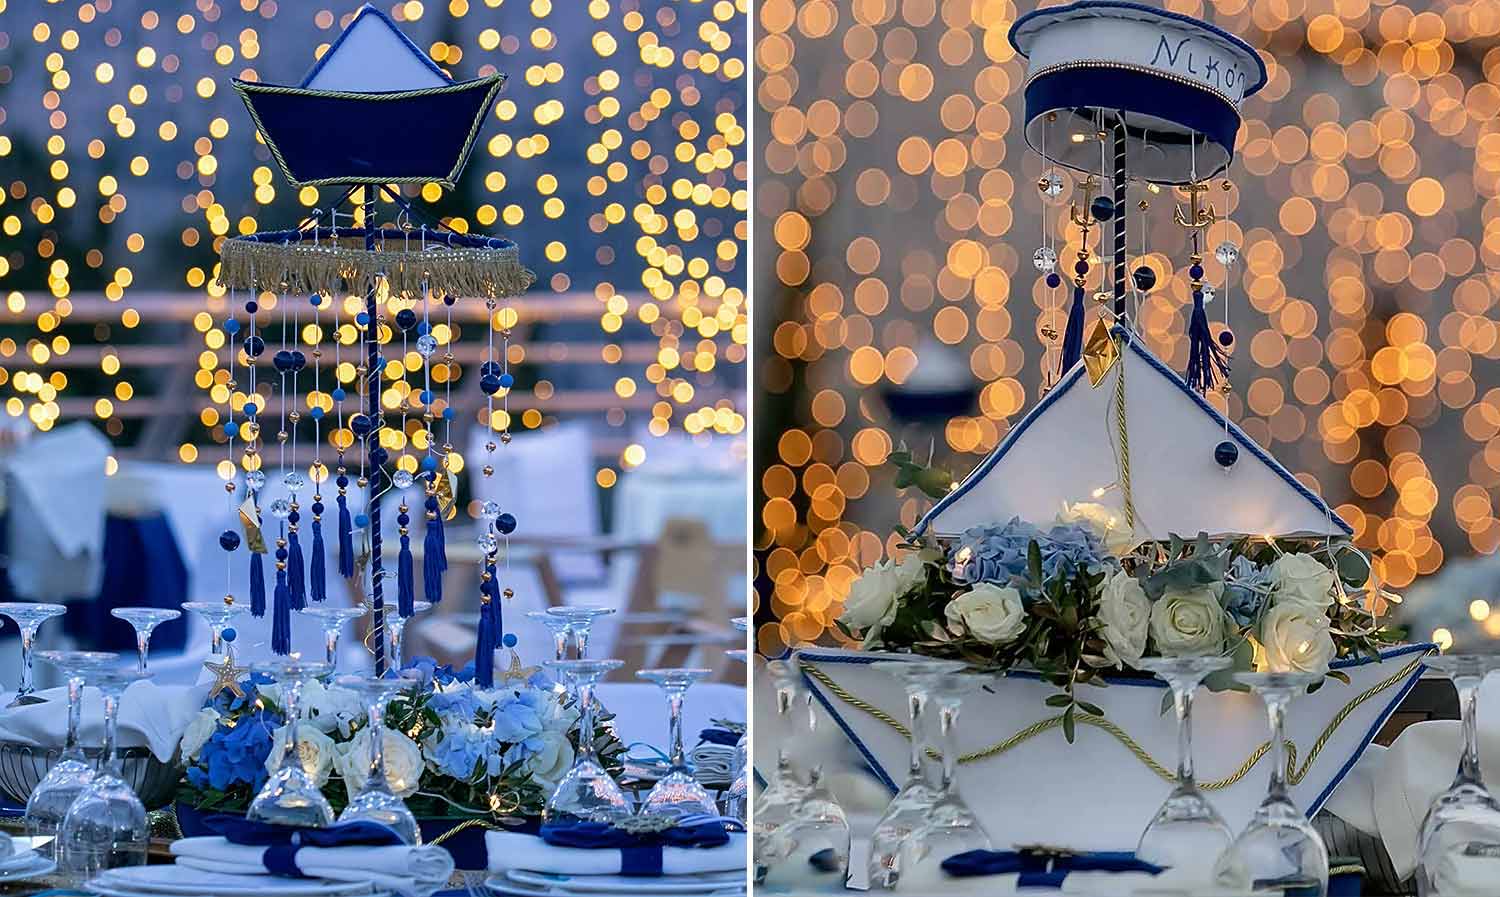 Two kinds of centerpieces with handmade boats blue and gold elements and natural flowers foe a royal navy themed baby boy baptism